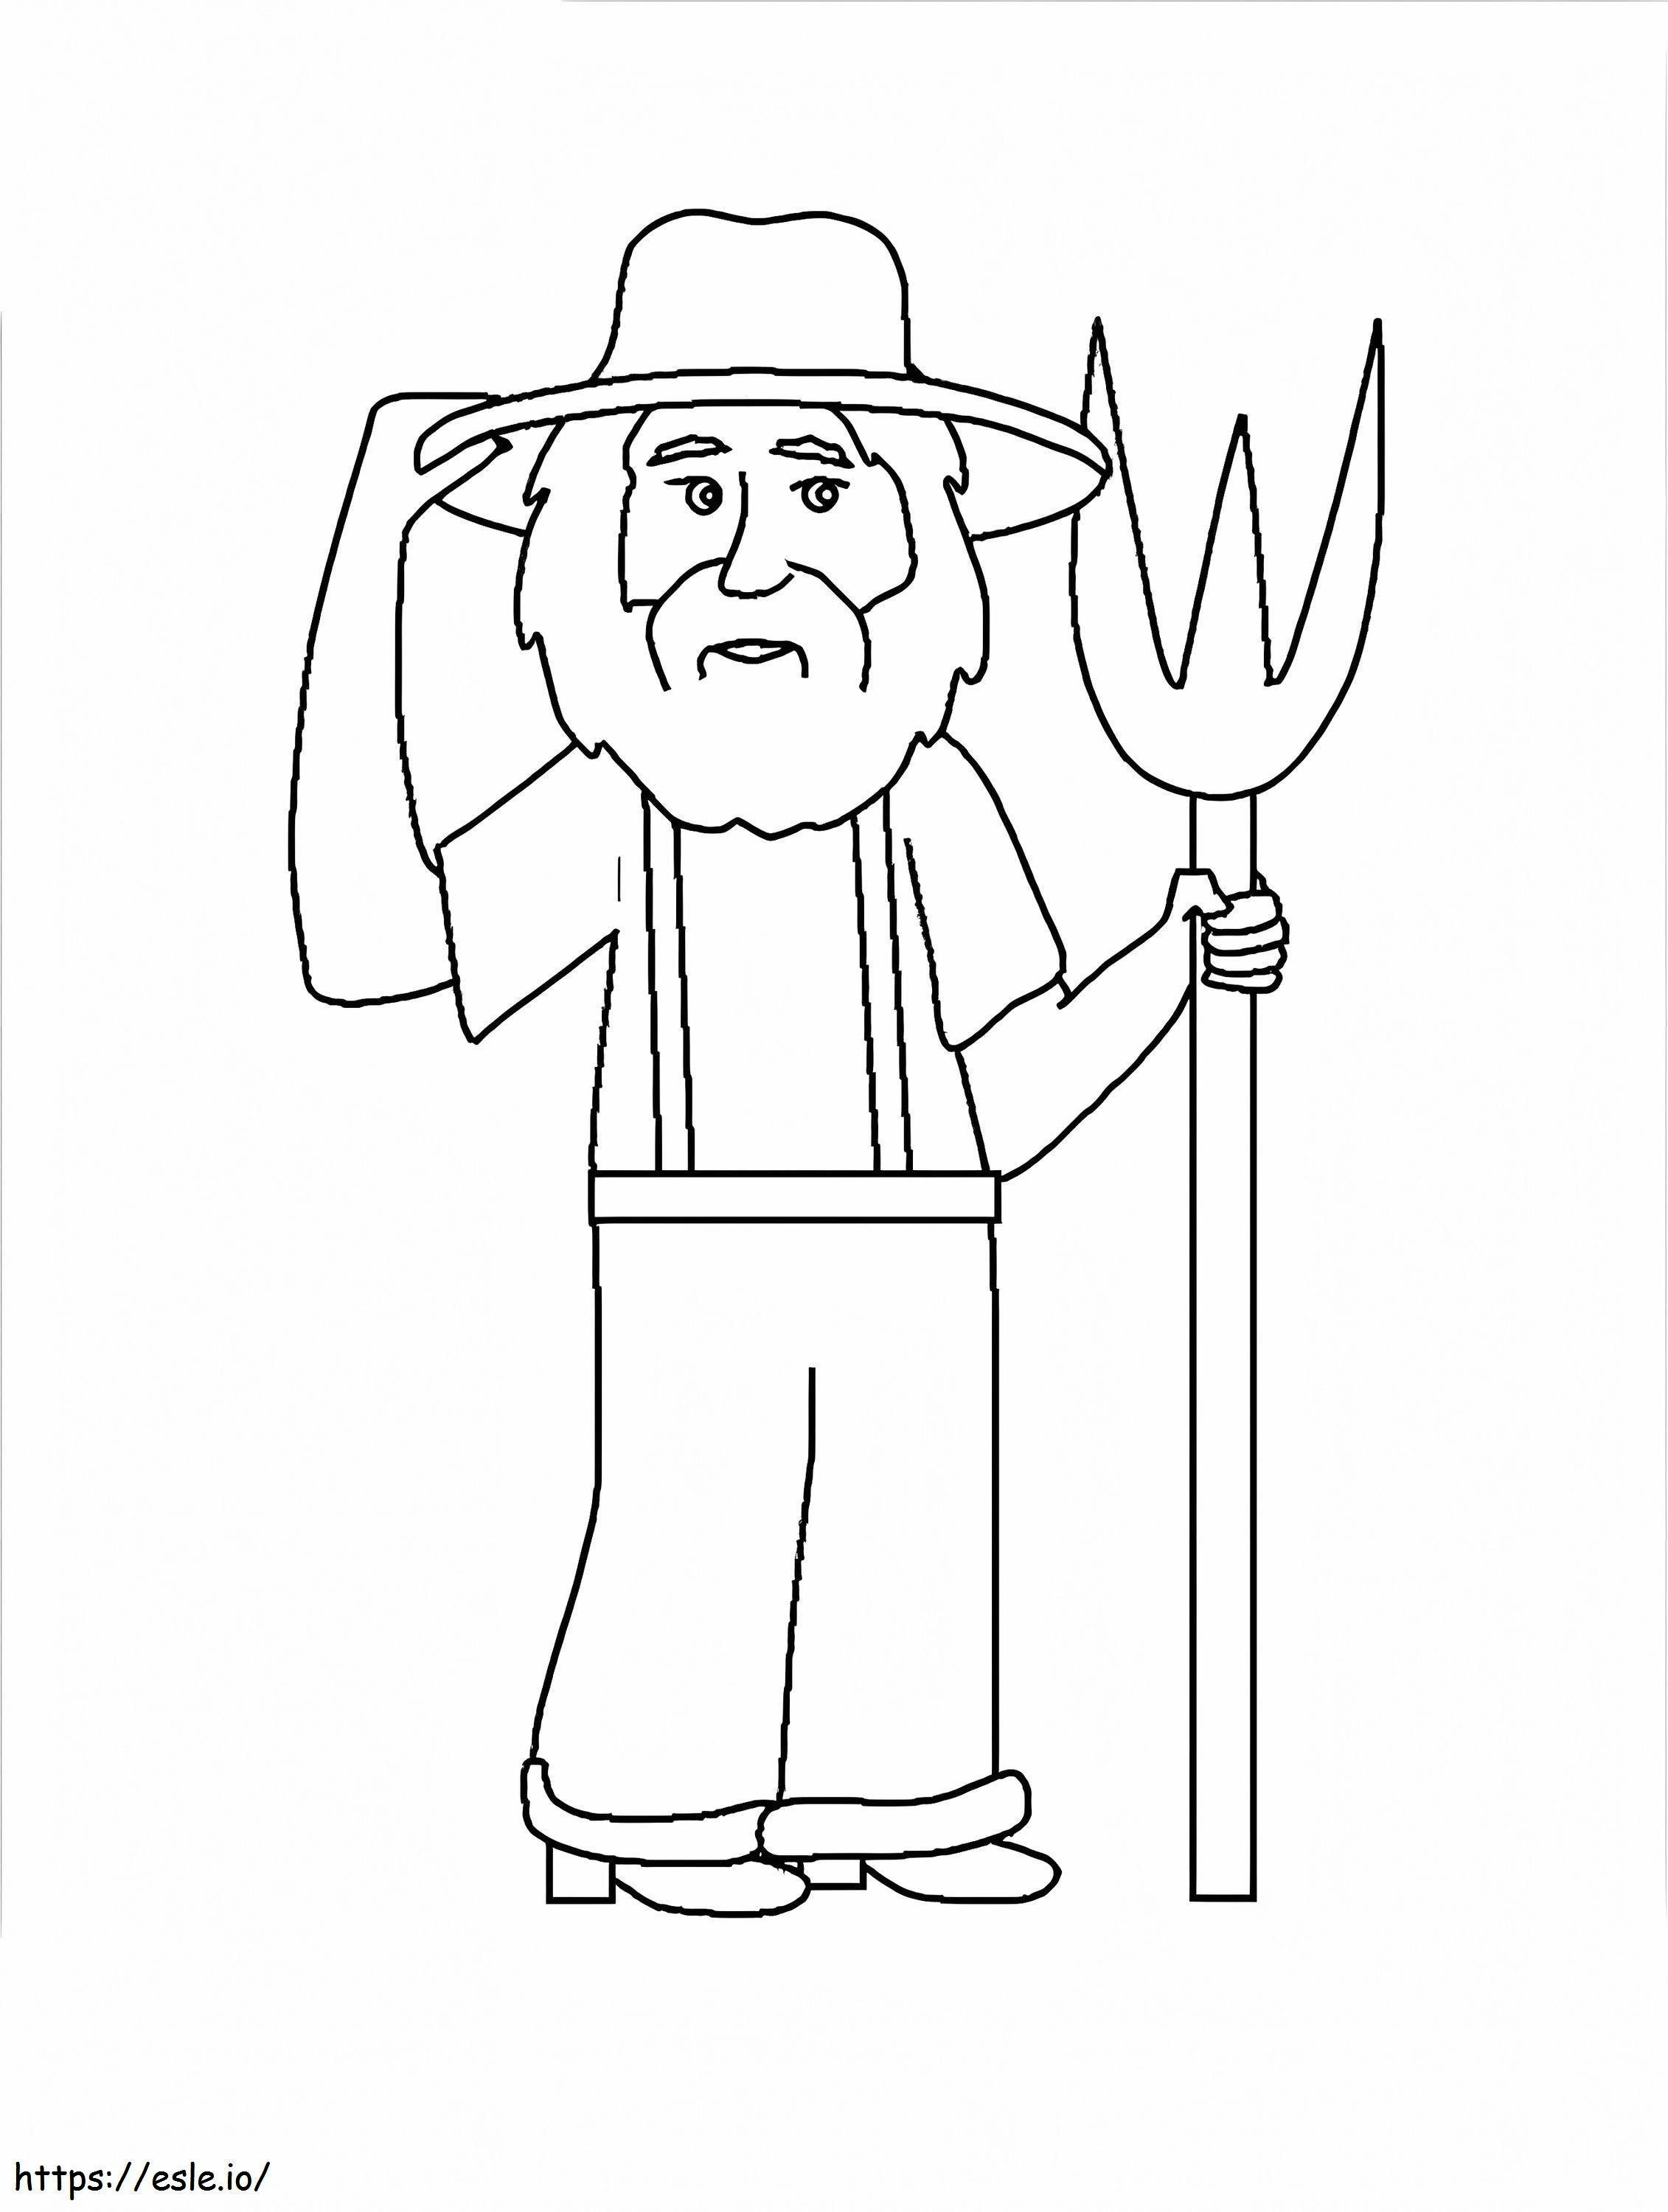 Old Farmer 1 coloring page